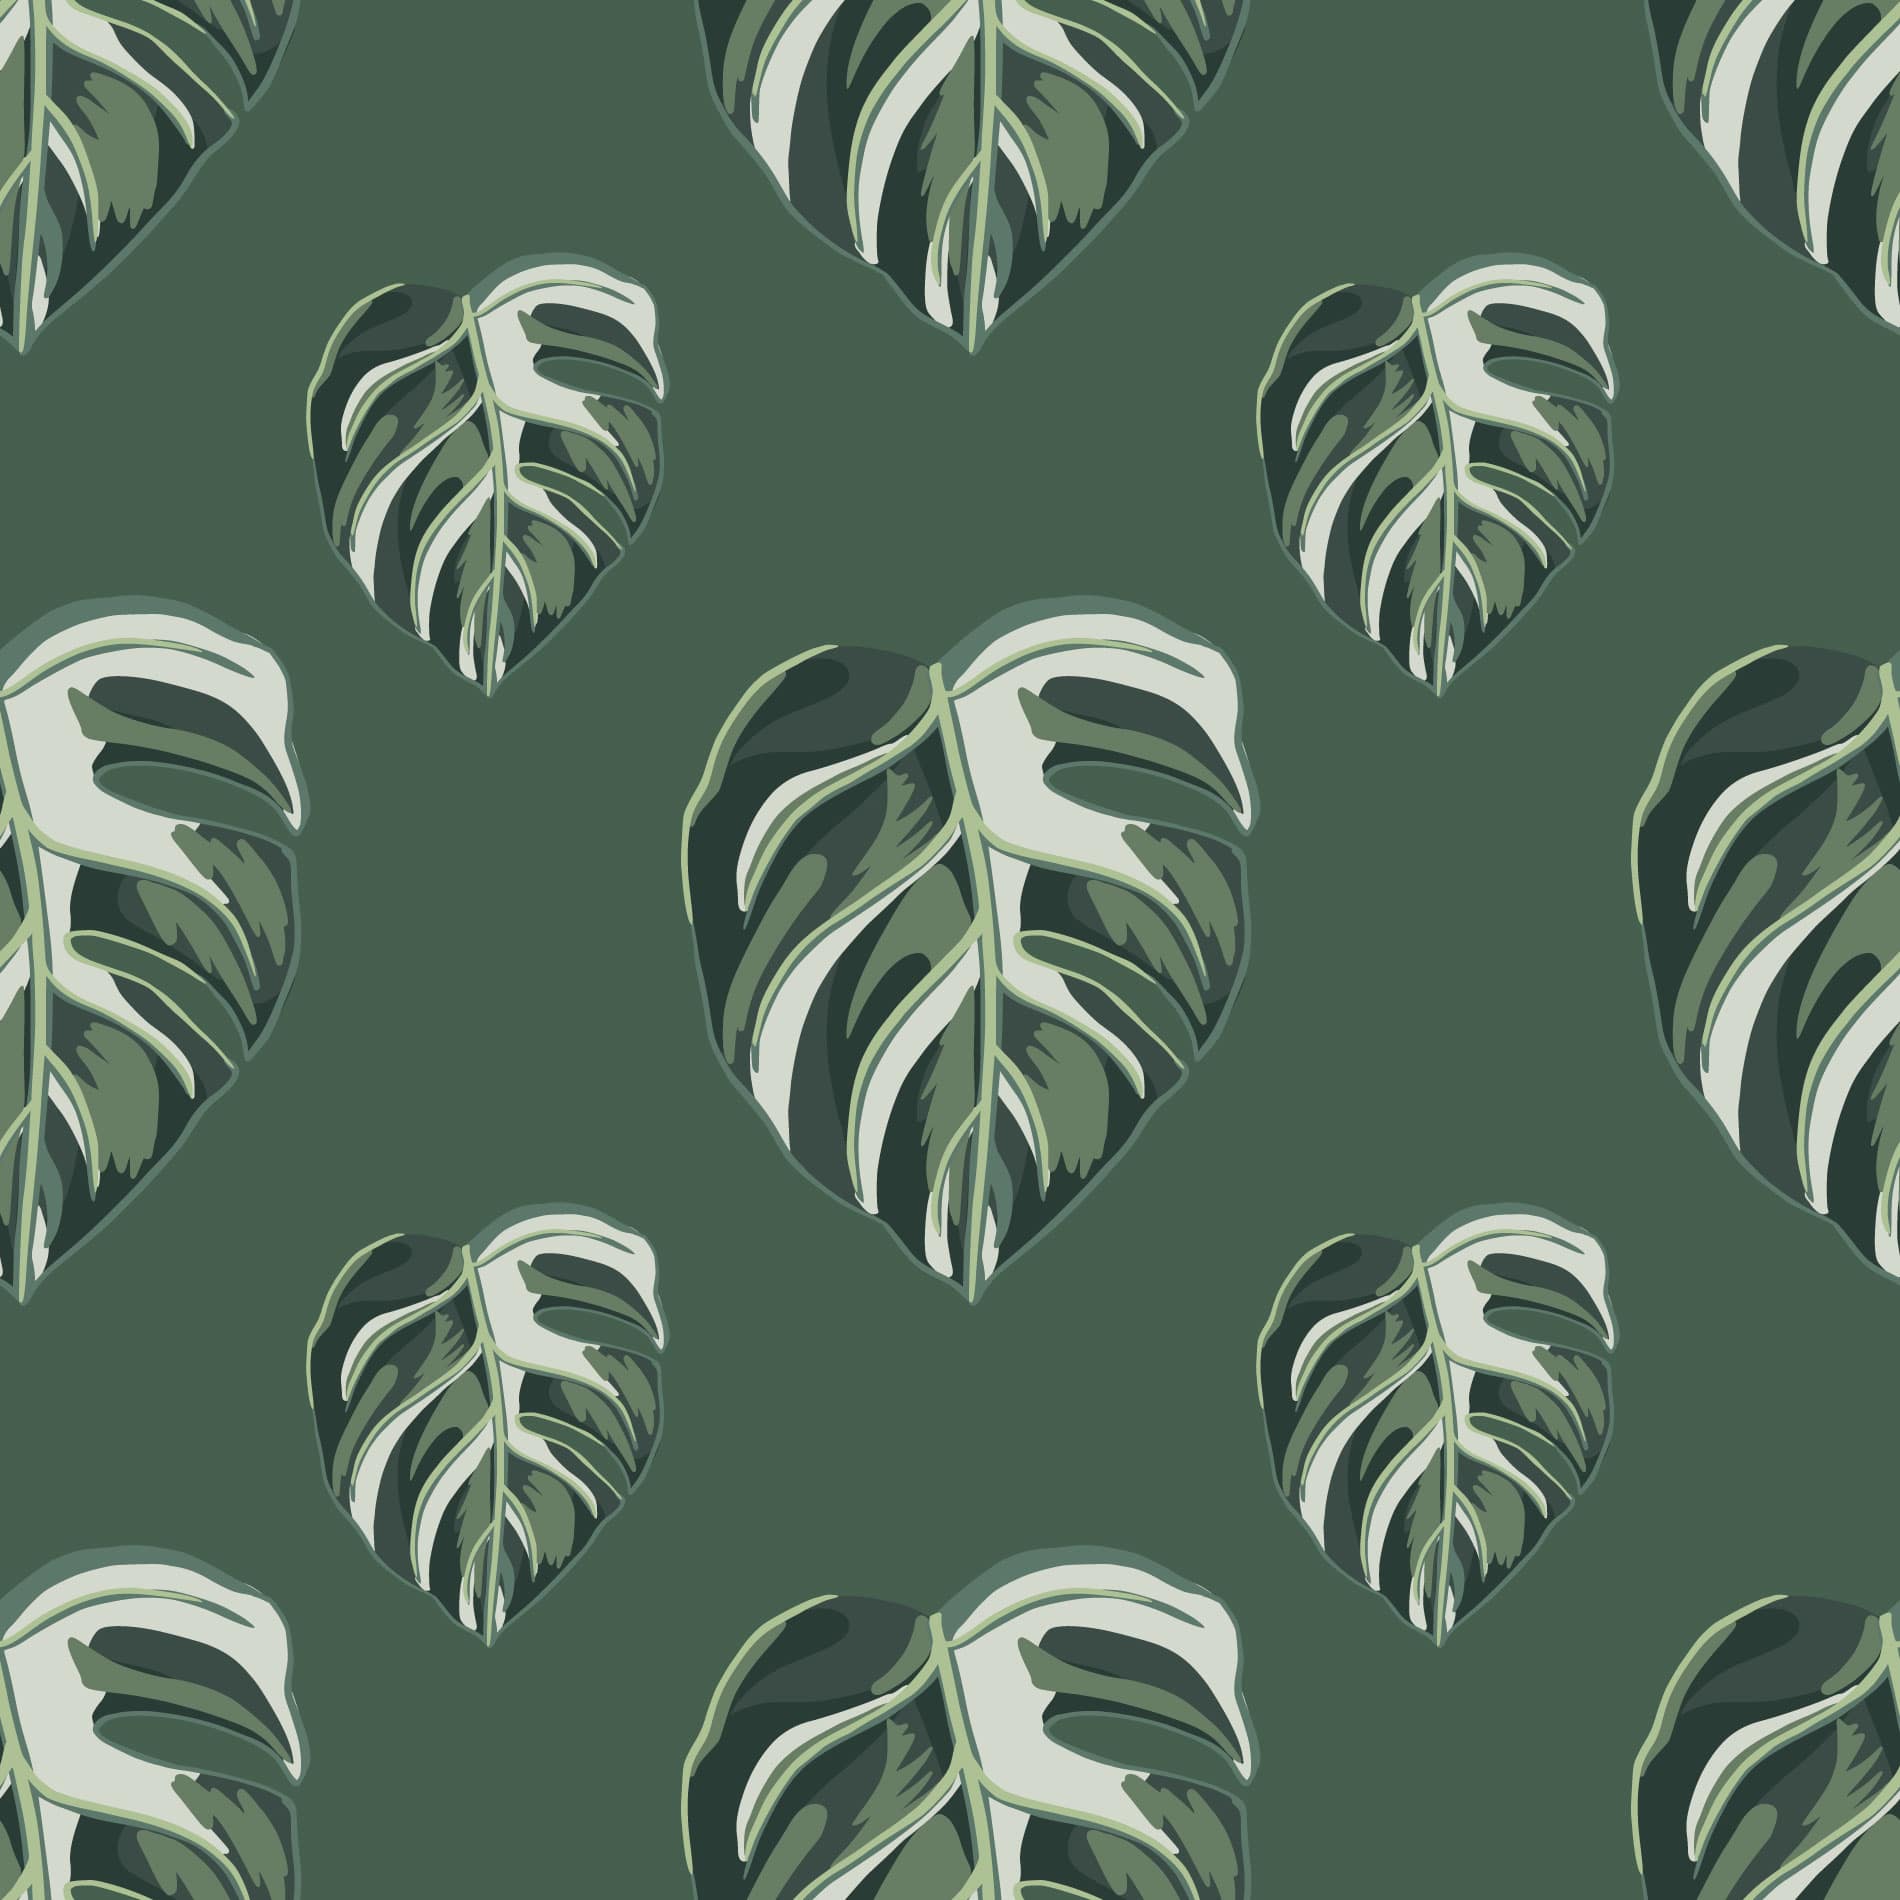 A pattern of green leaves on an olive background - Monstera